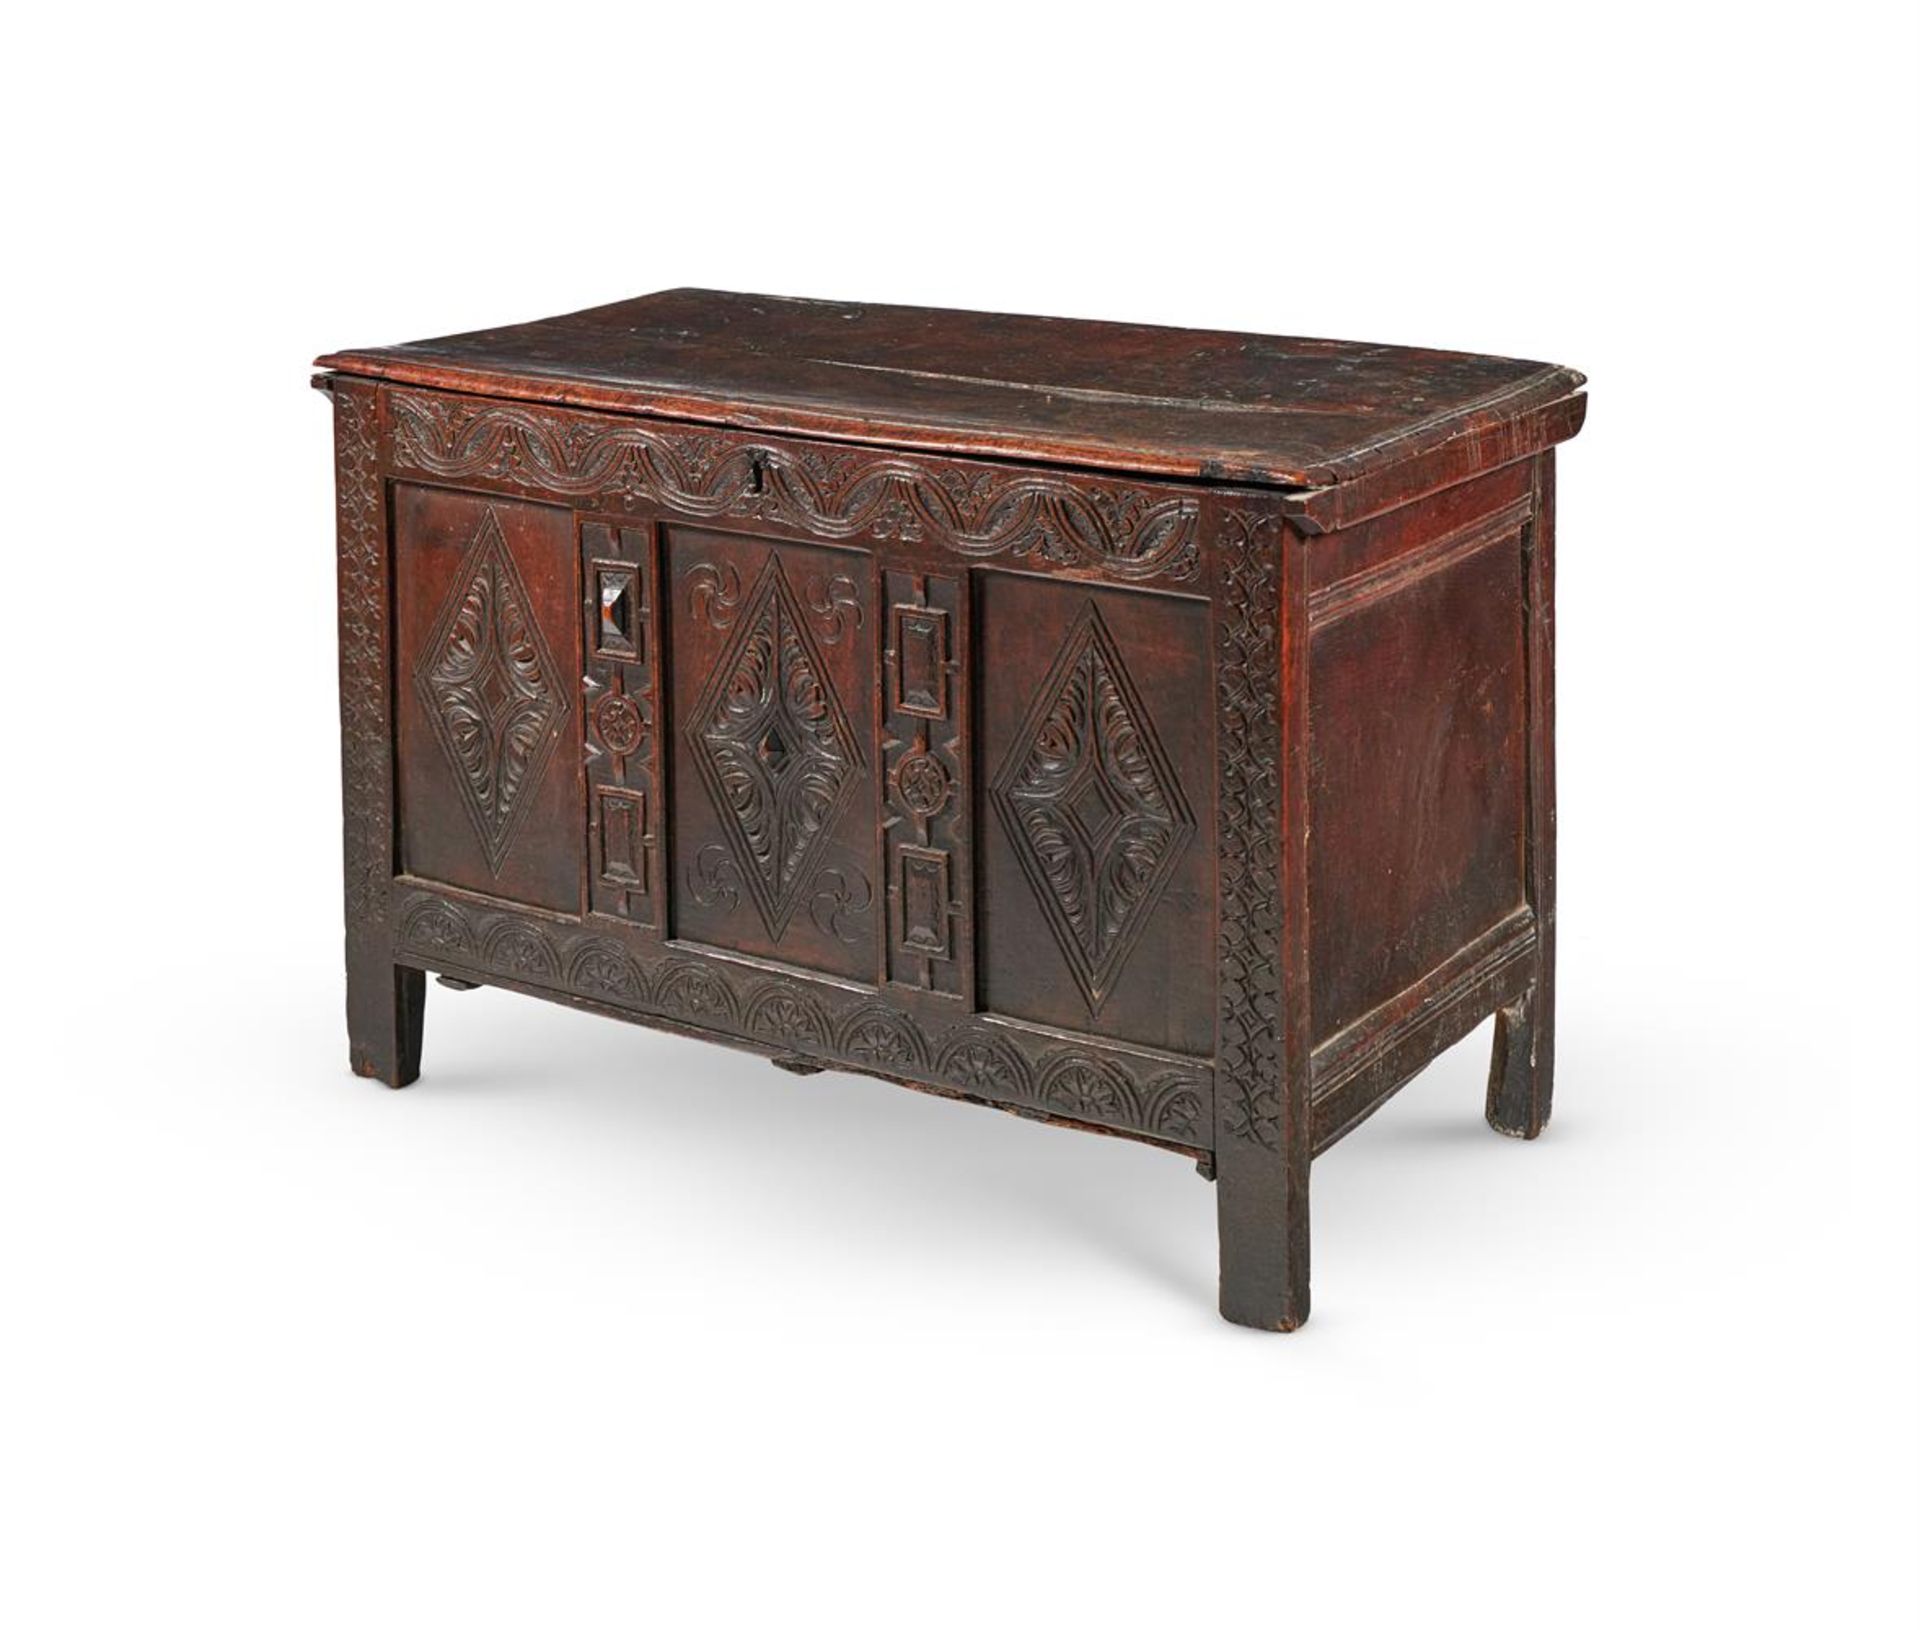 AN OAK JOINED CHEST, 17TH CENTURY